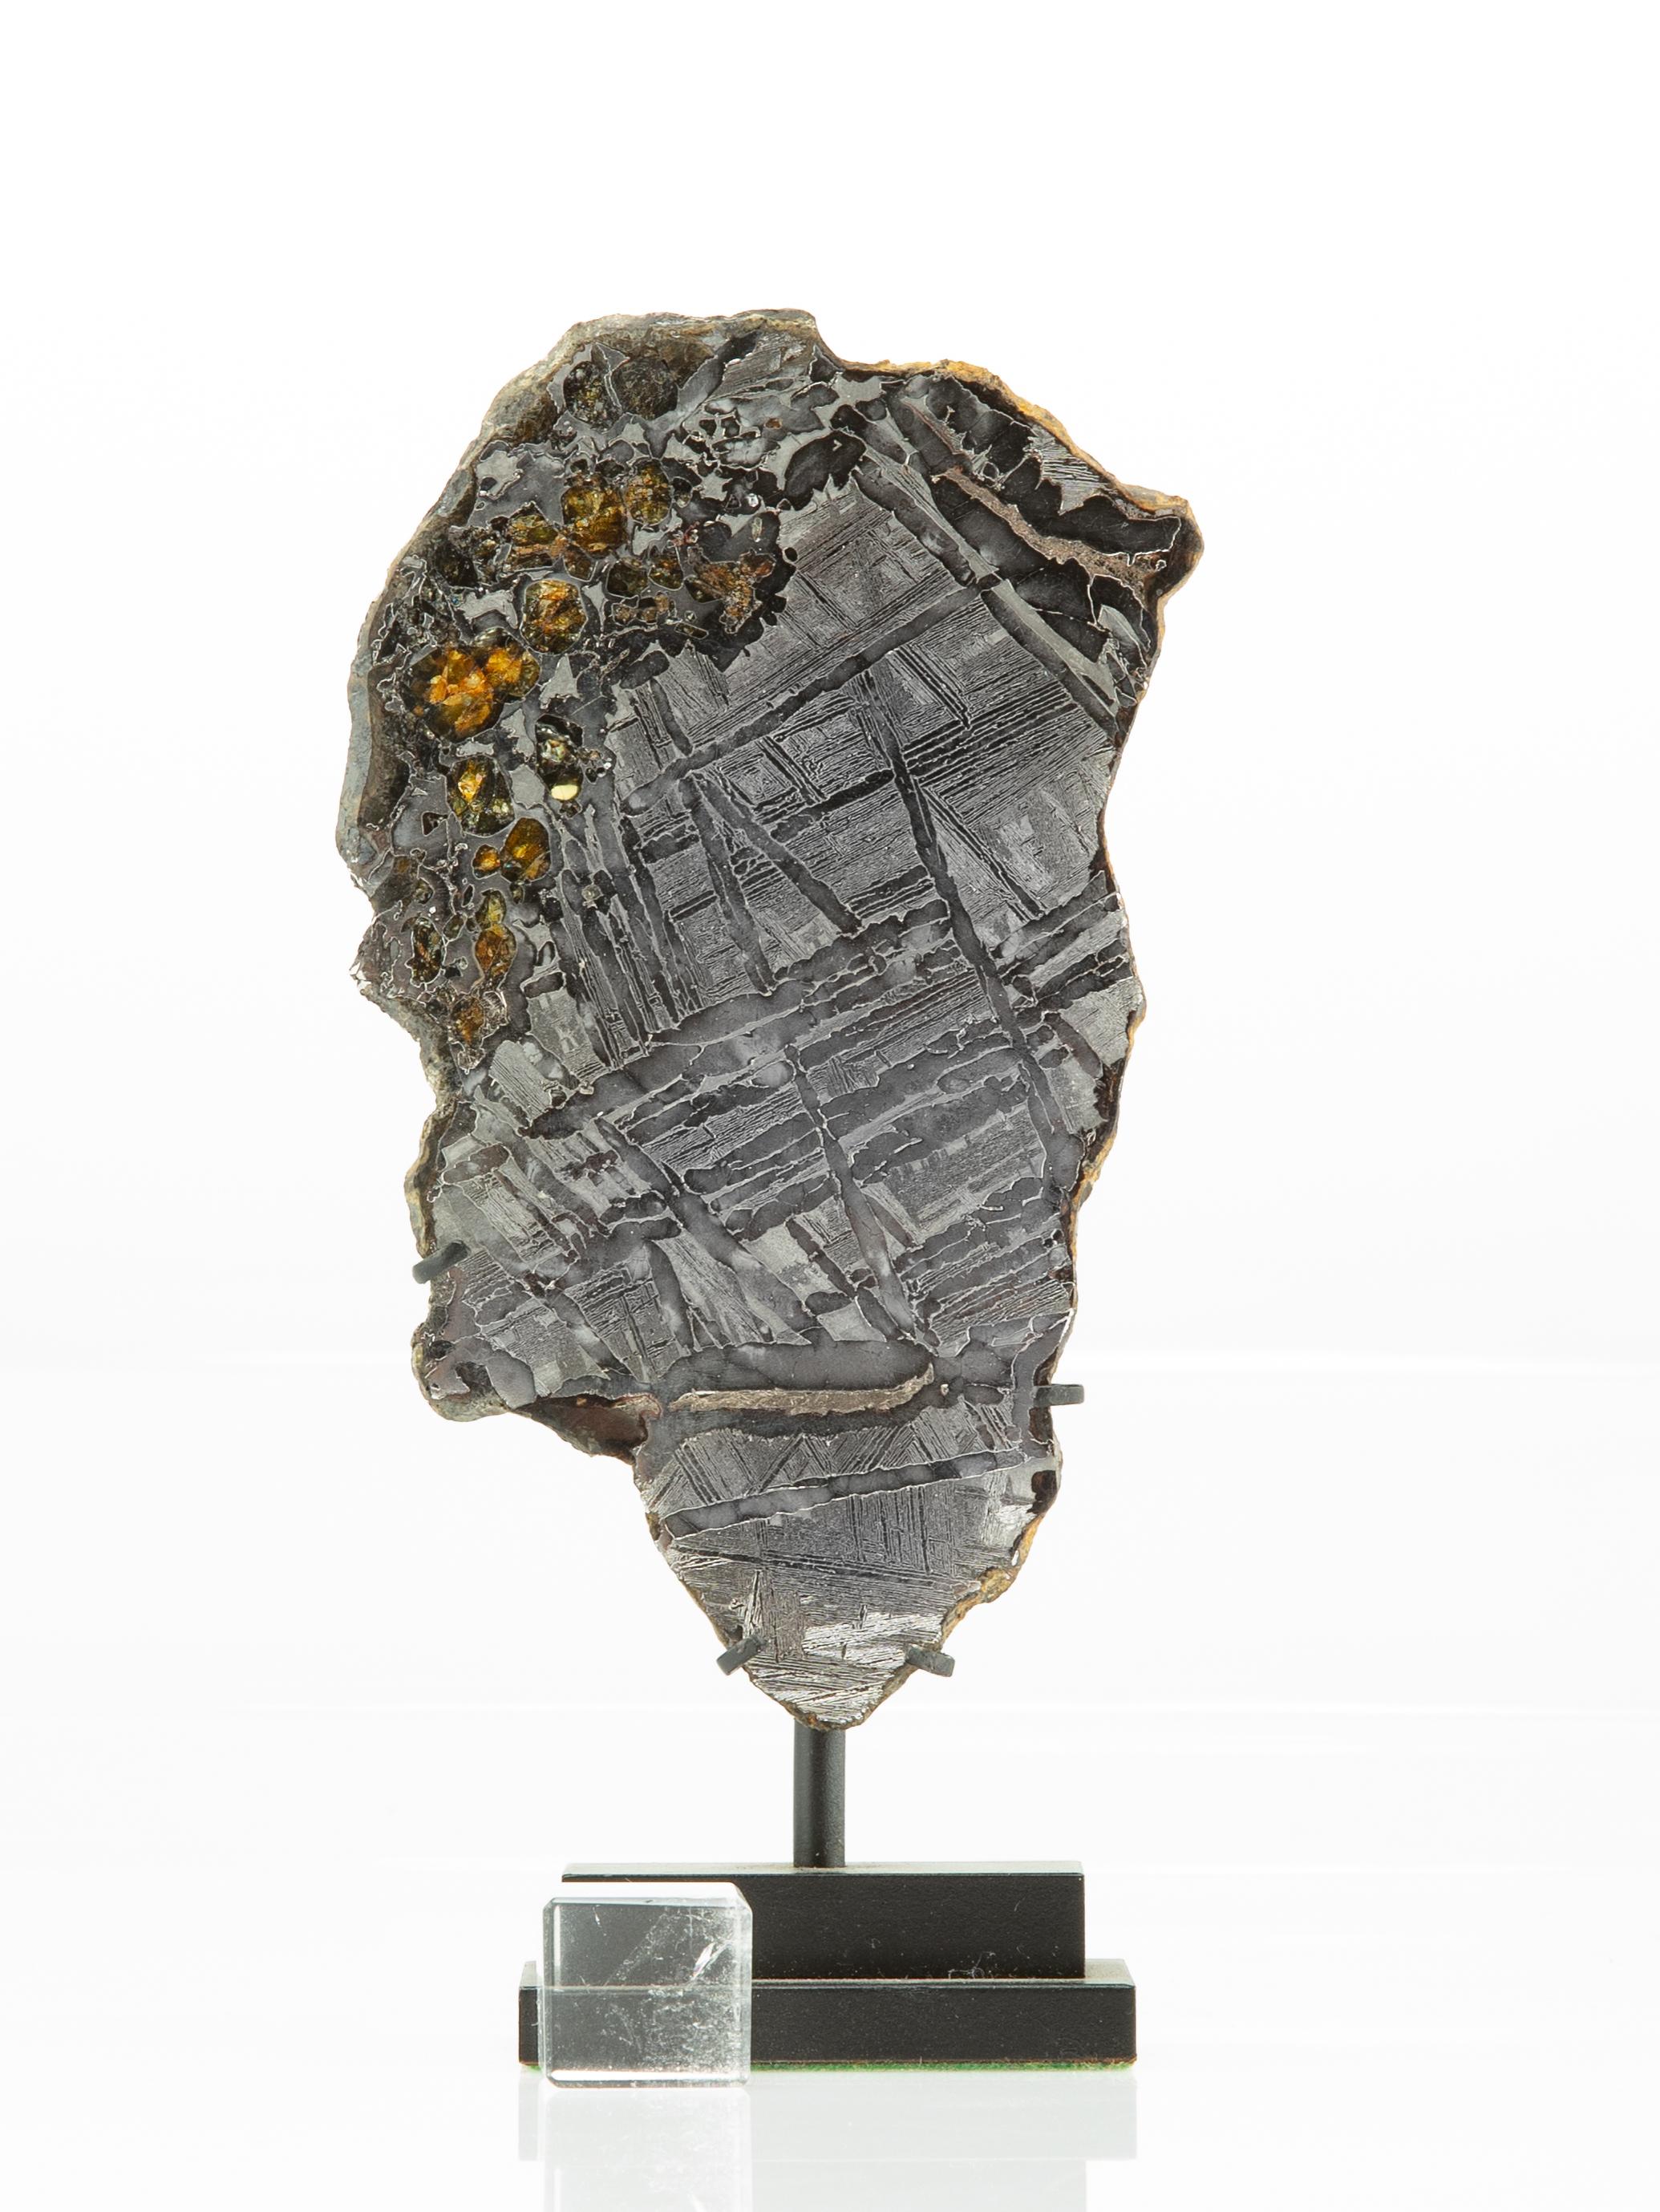 This is a complete slice of a meteorite pallasite with gemstones. Highly translucent olivine and peridot are plentiful and are fixed in a matrix, polished to mirror finish on one side and lightly etched on reverse to reveal crystalline structure of